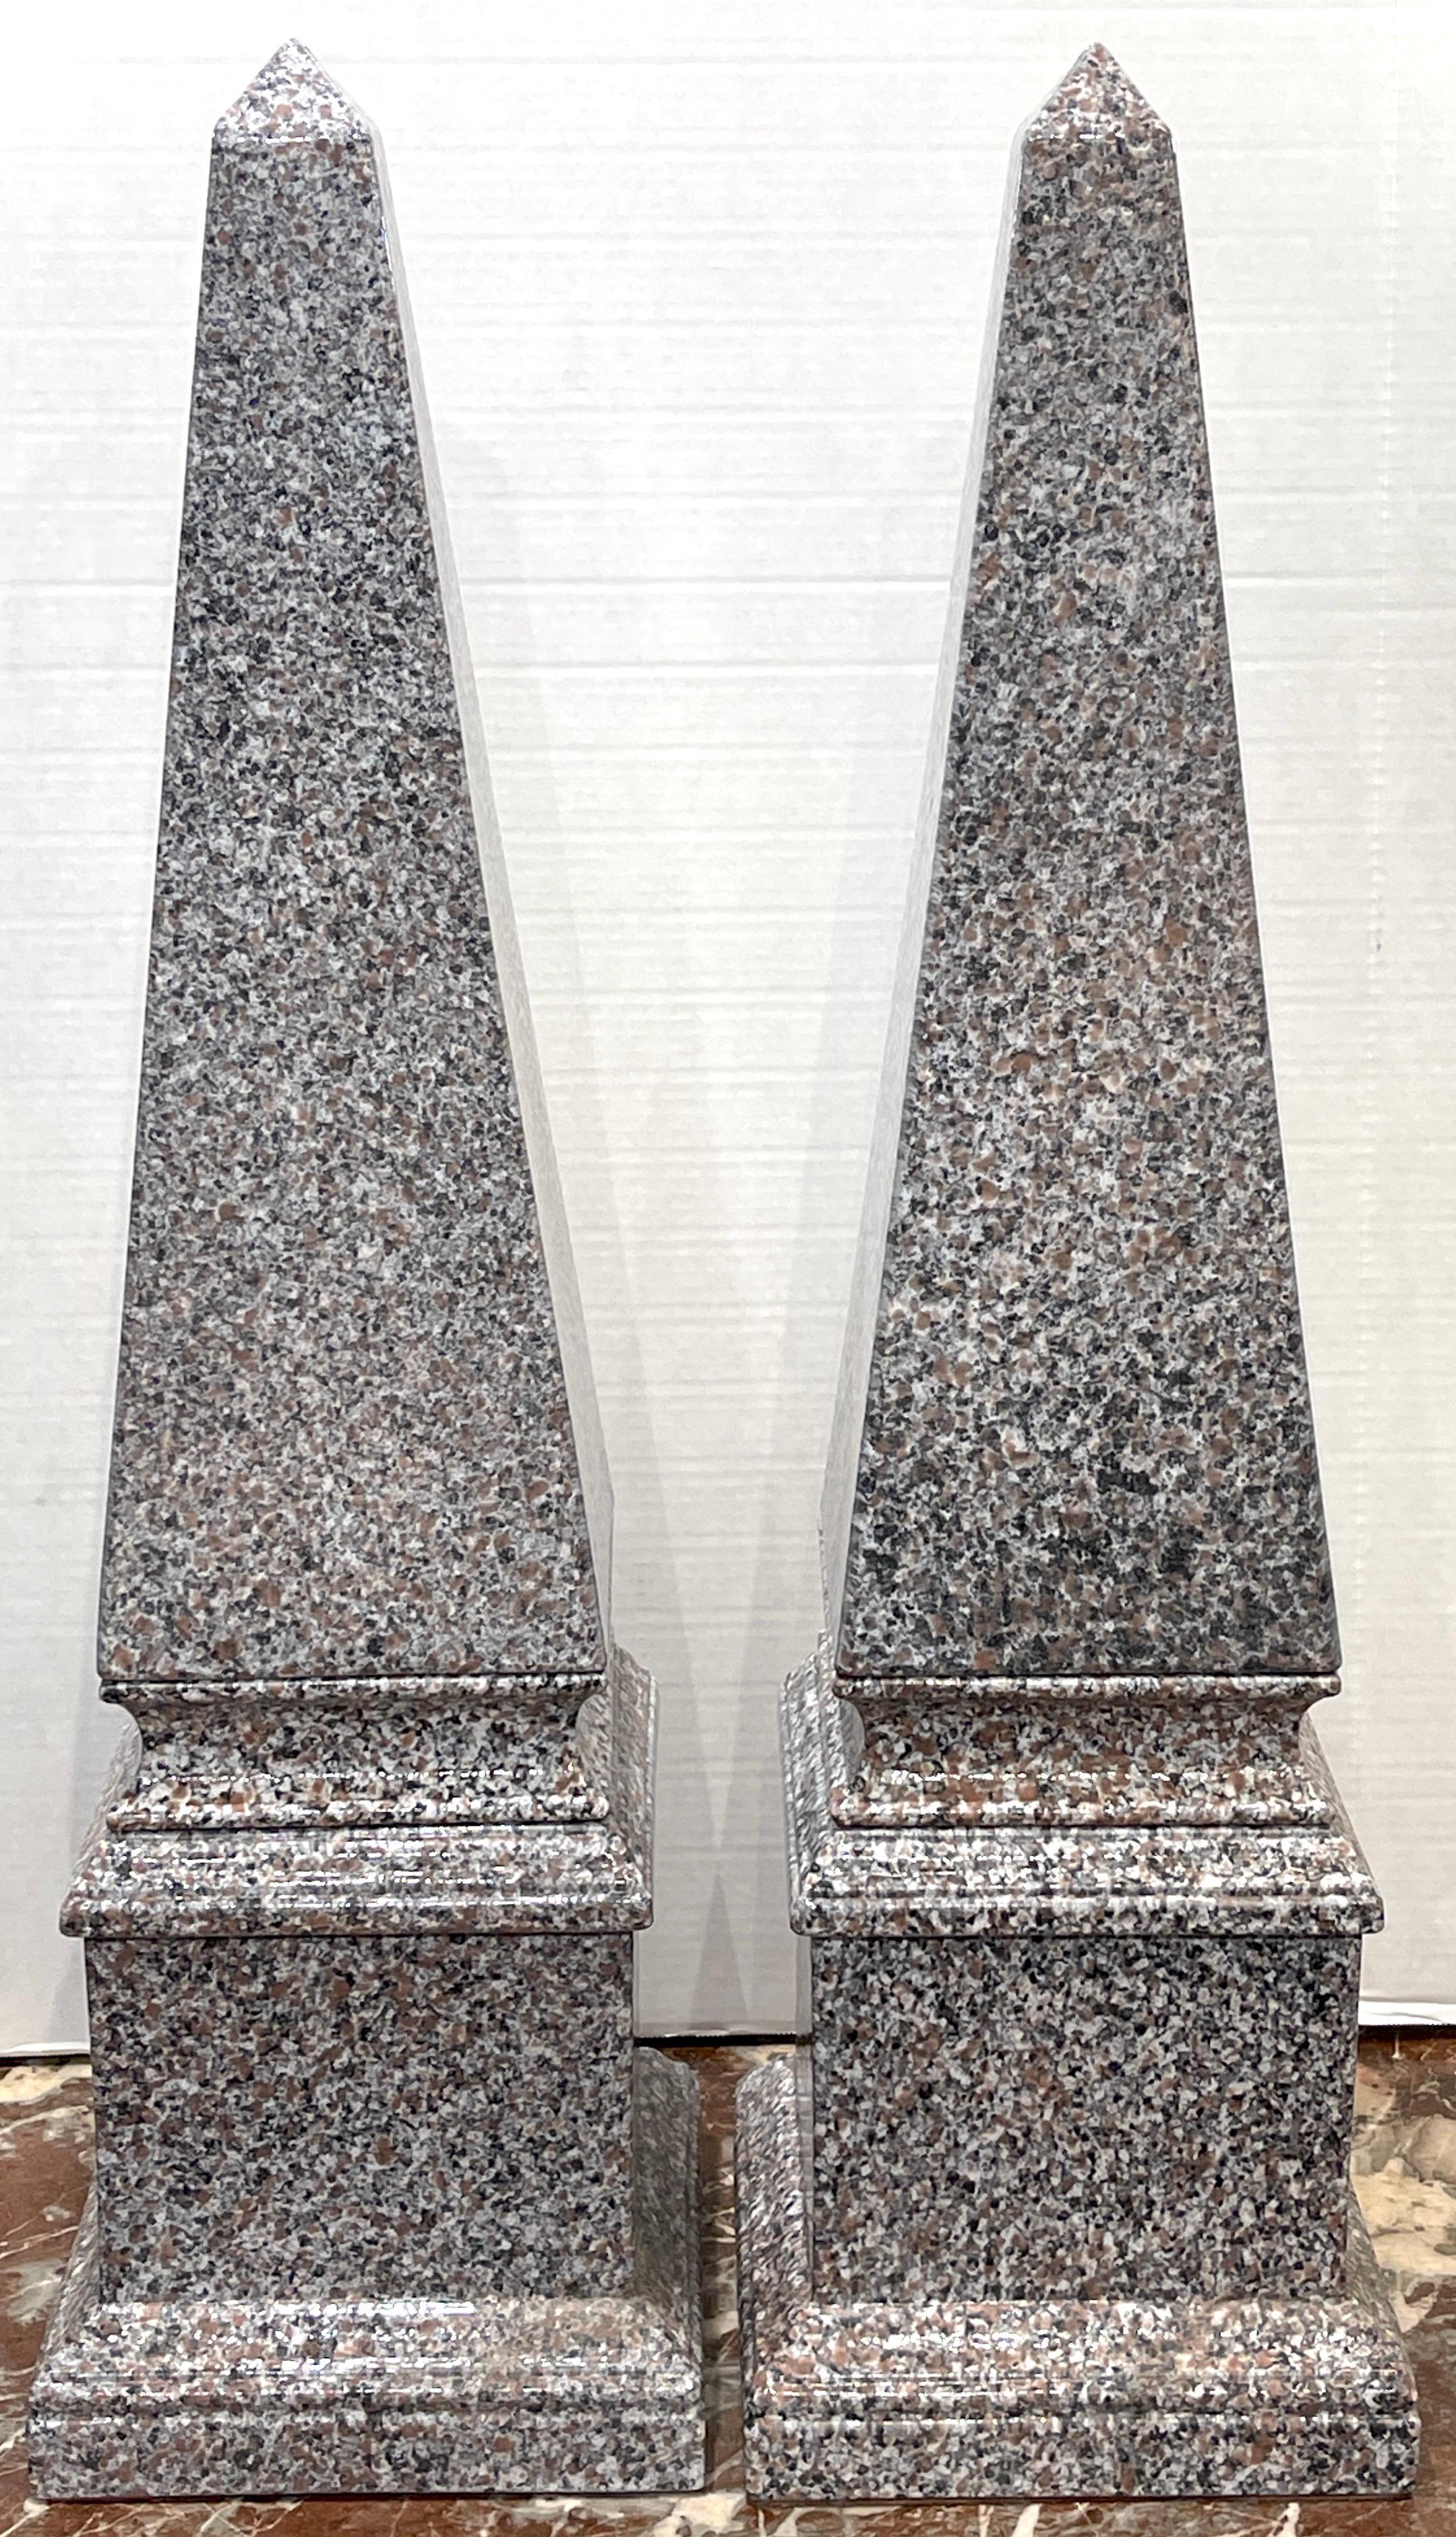 Large pair of Italian aptware/mixed earth obelisks, Each one standing 32-inches high with a diameter of 9-inches.